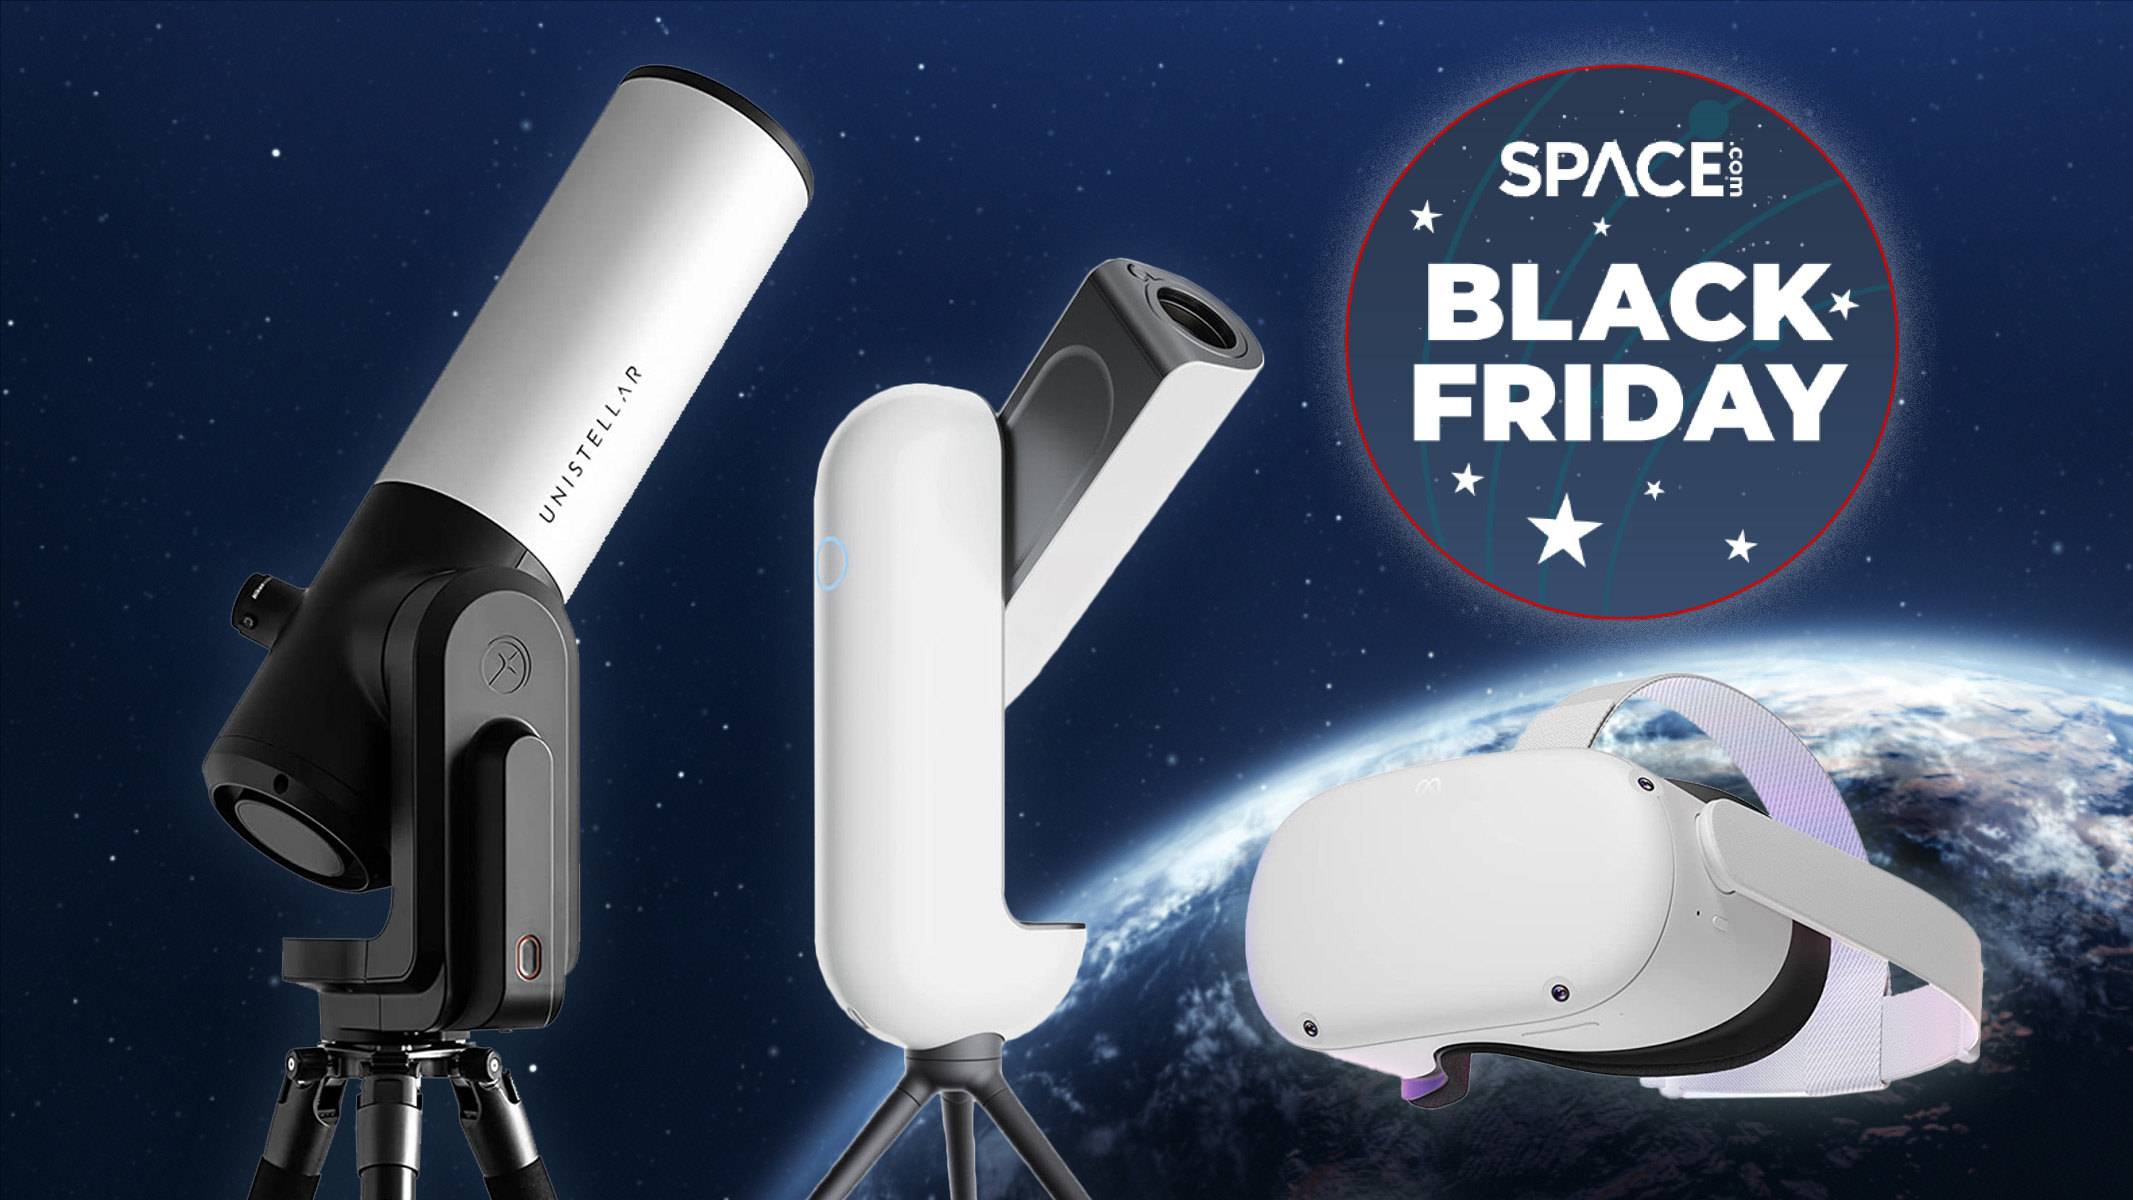 Black Friday space gift ideas: Telescope deals, binocular discounts, camera deals and more Space